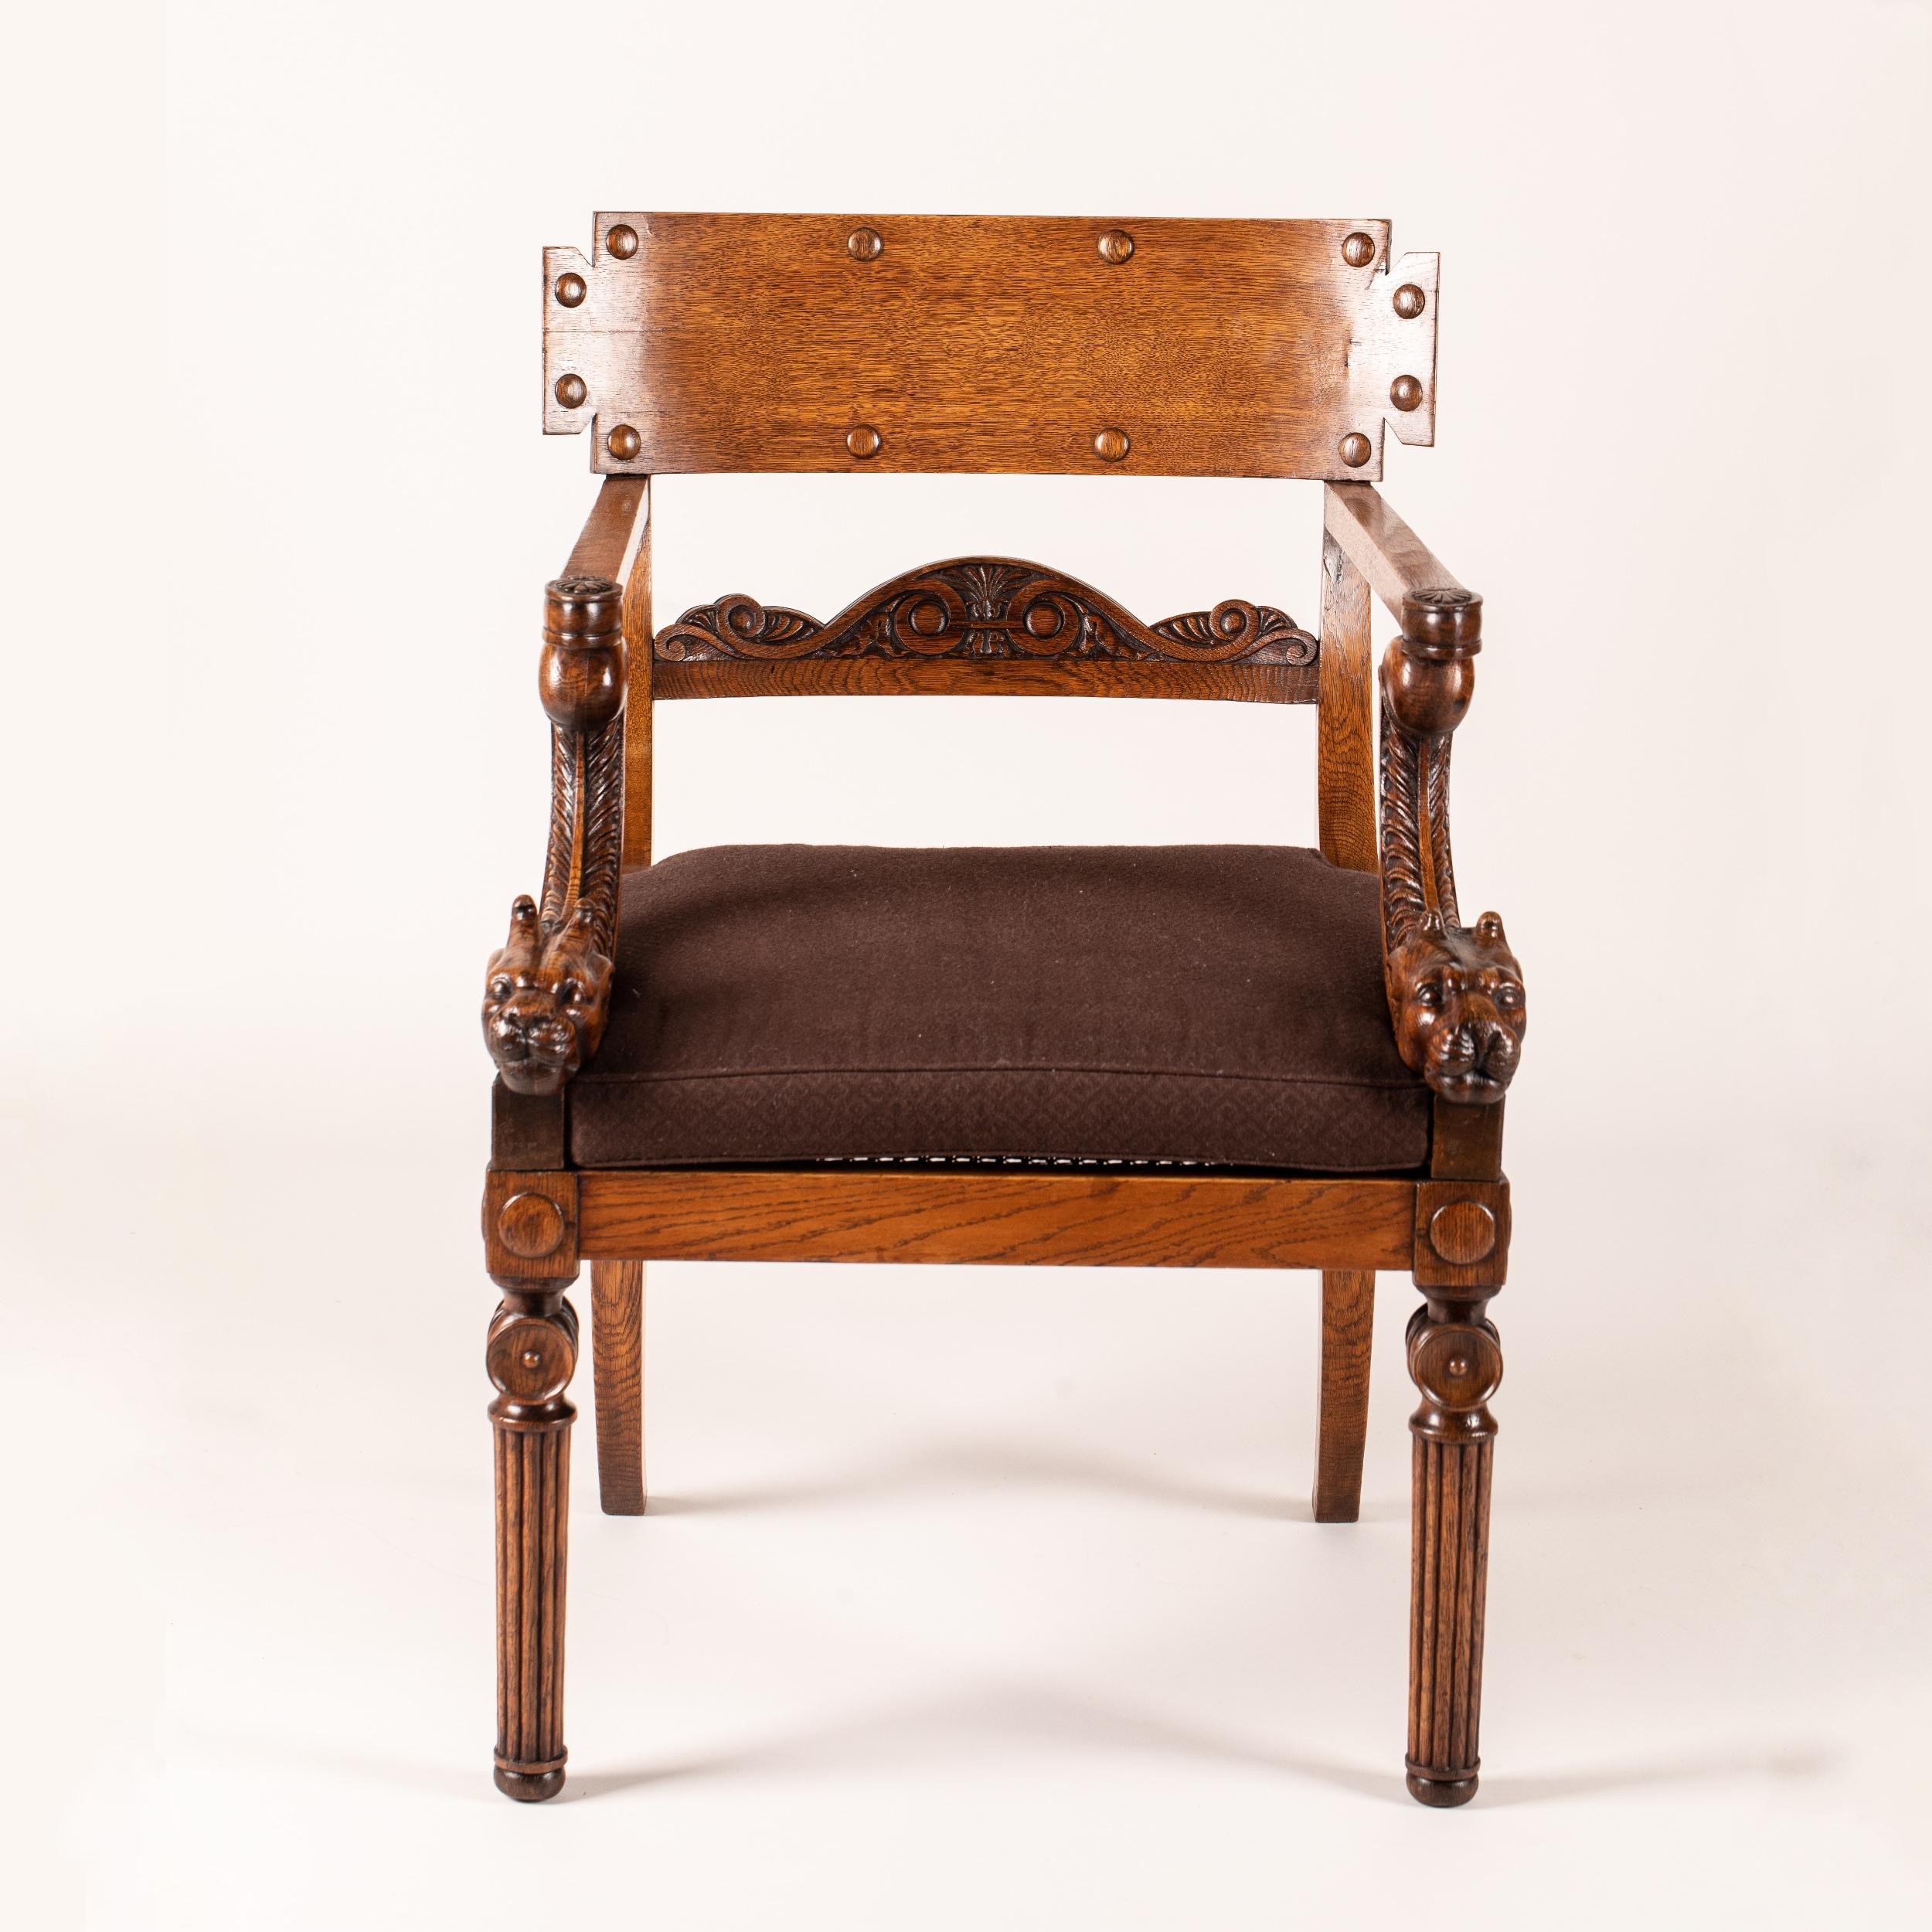 19th Century Regency Period Klismos Armchair with Leopard Head Carved Armrests For Sale 4